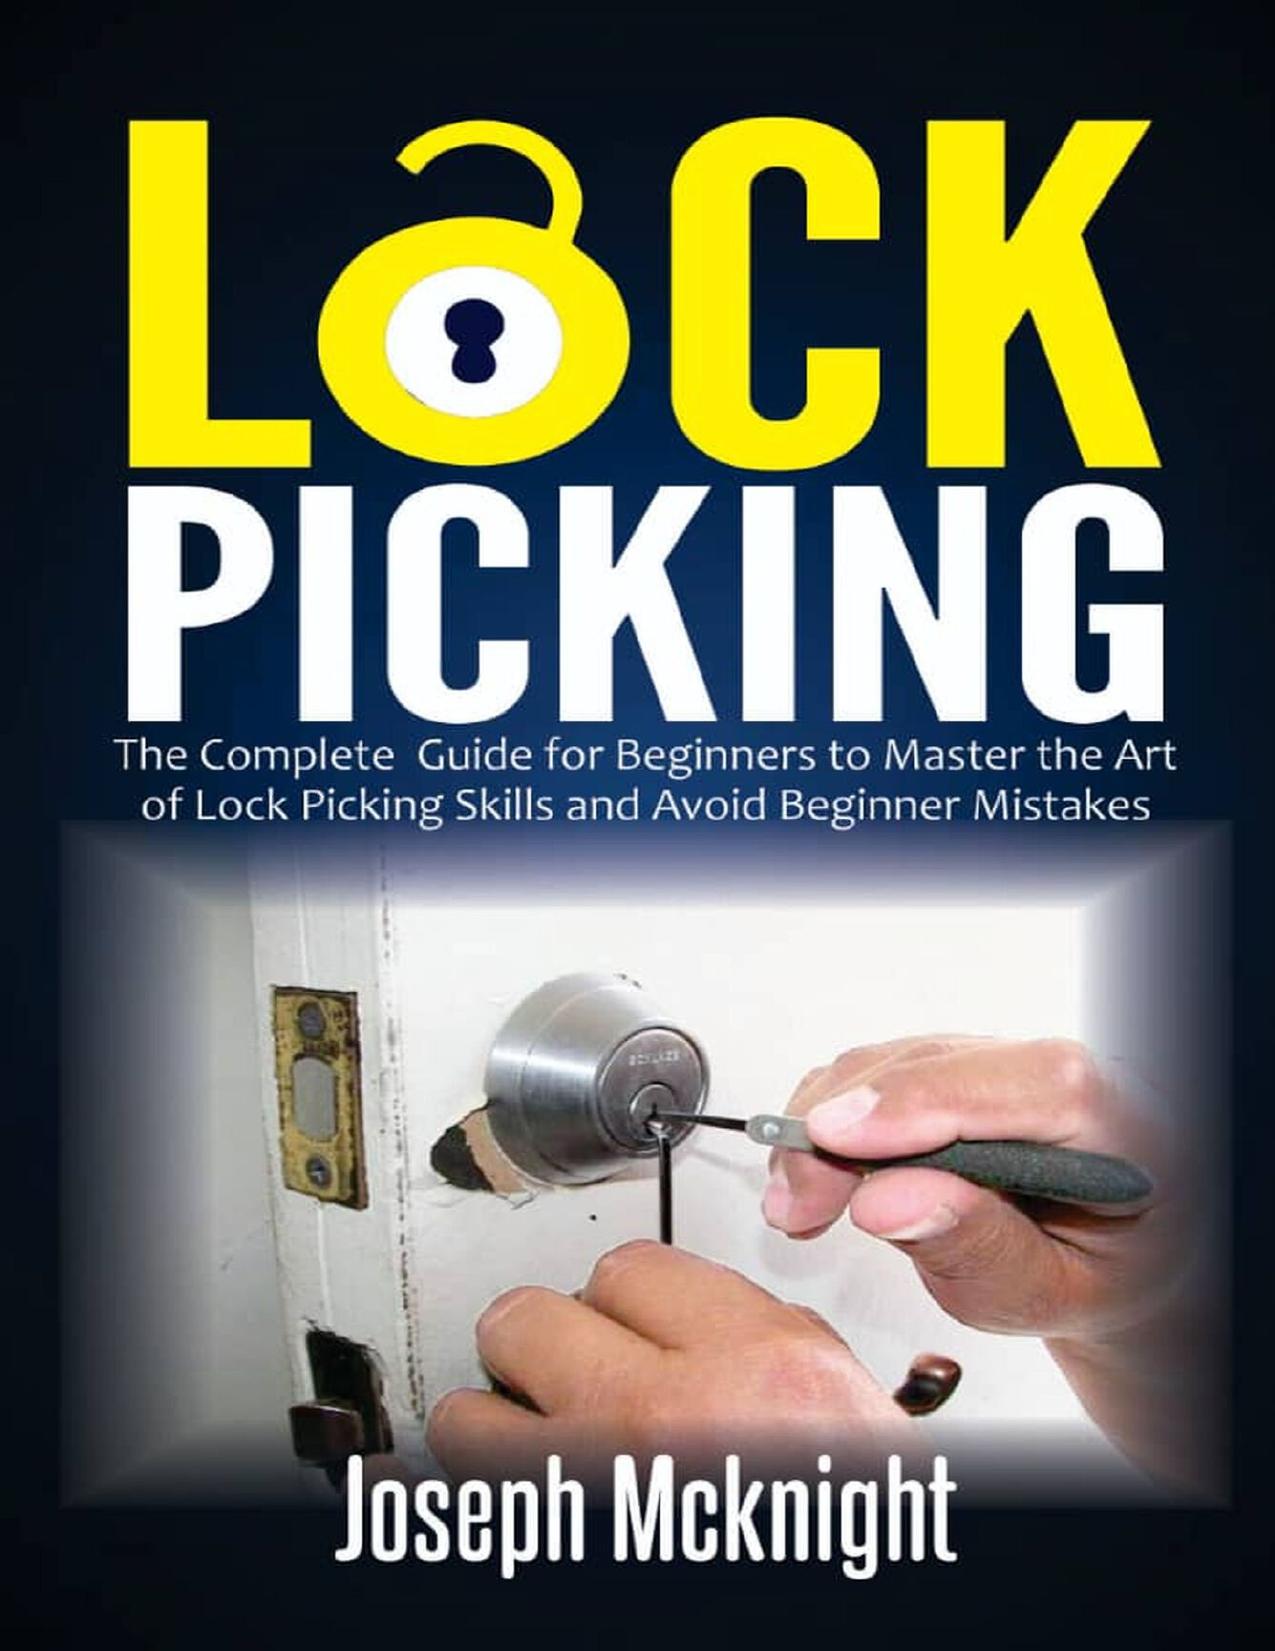 Lock Picking: The Complete Guide for Beginners to Master the Art of Lock Picking Skills and Avoid Beginner Mistakes by McKnight Joseph